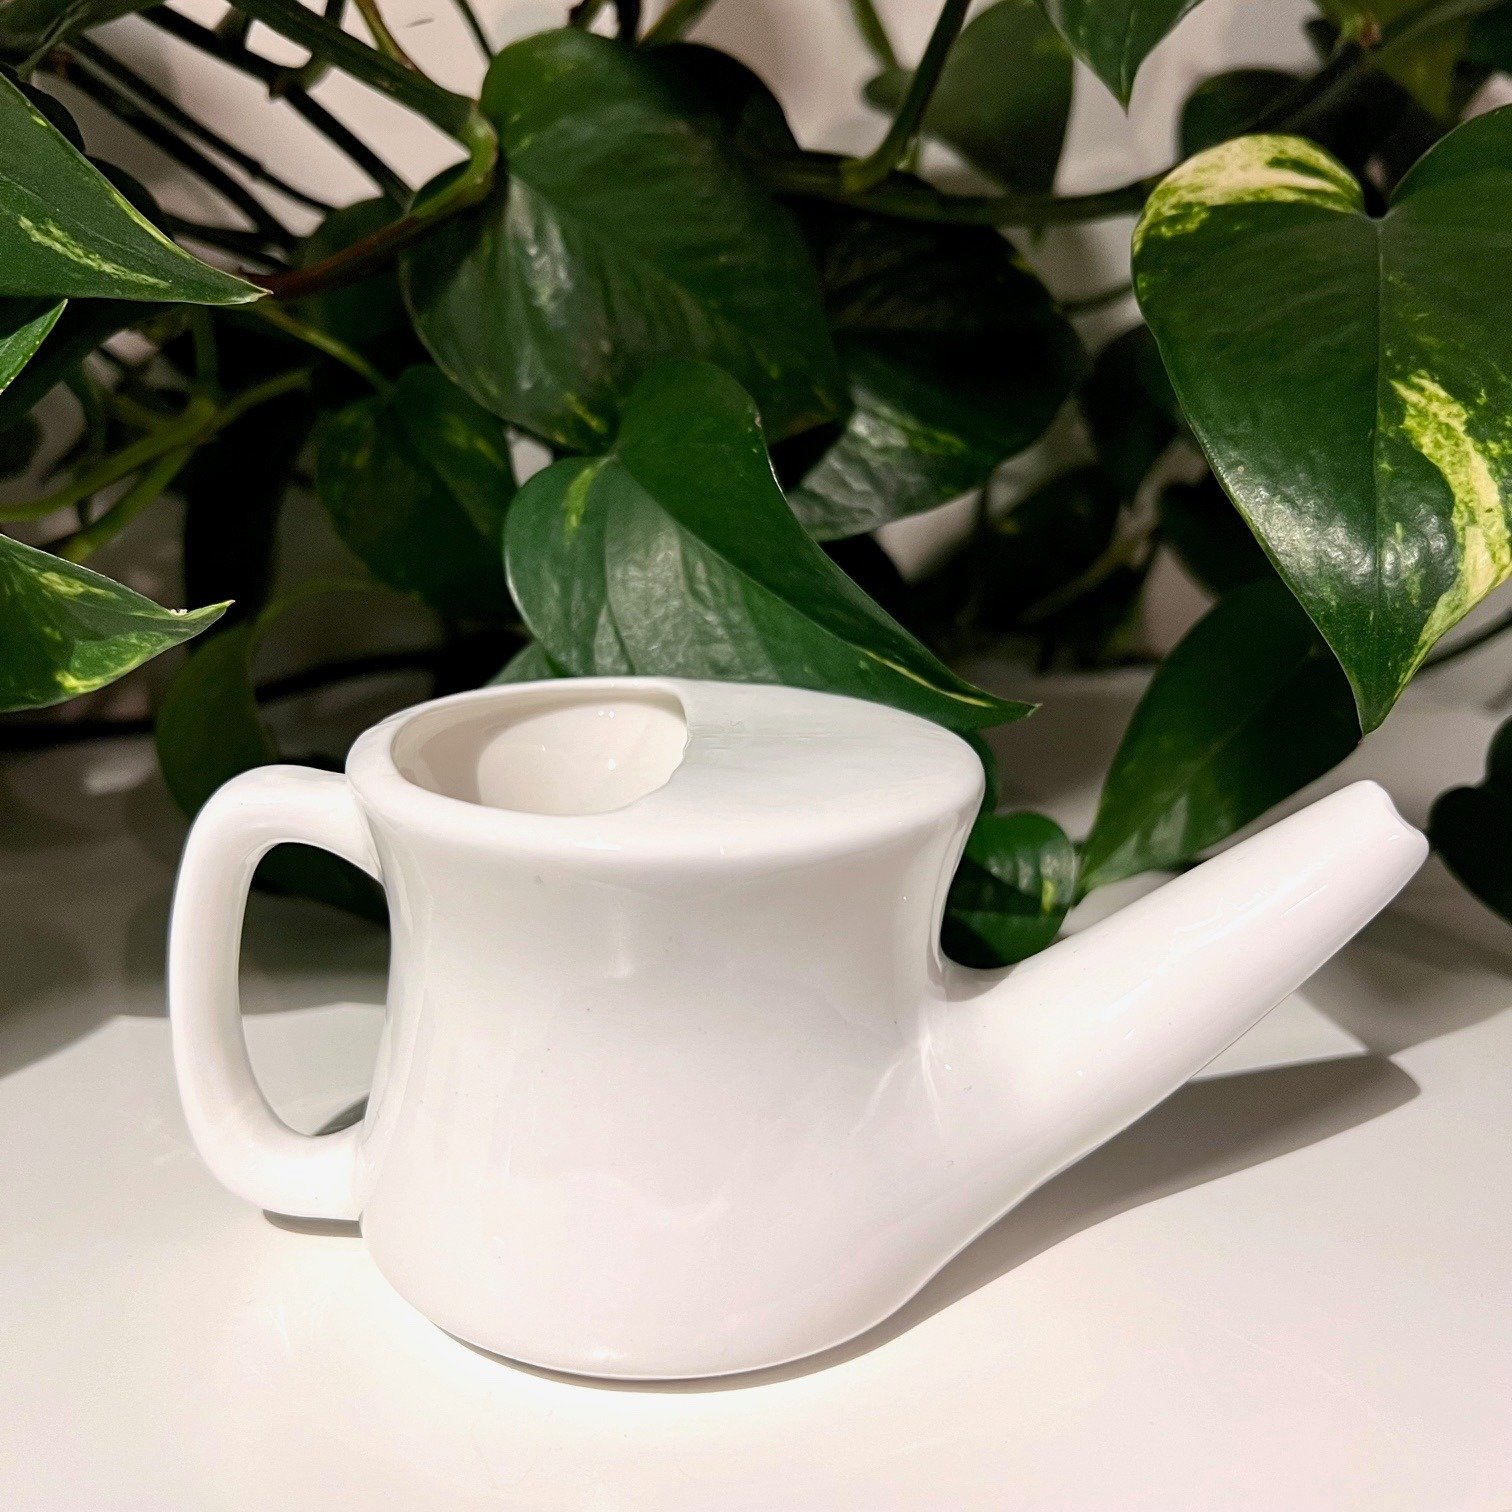 Check out these Neti Pots in Prop Shop✨

The neti pot is used in traditional Ayurvedic therapy to cleanse the nasal passages by gently flushing out allergens and other environmental irritants with a saline solution. (Salt for solution not included.)?